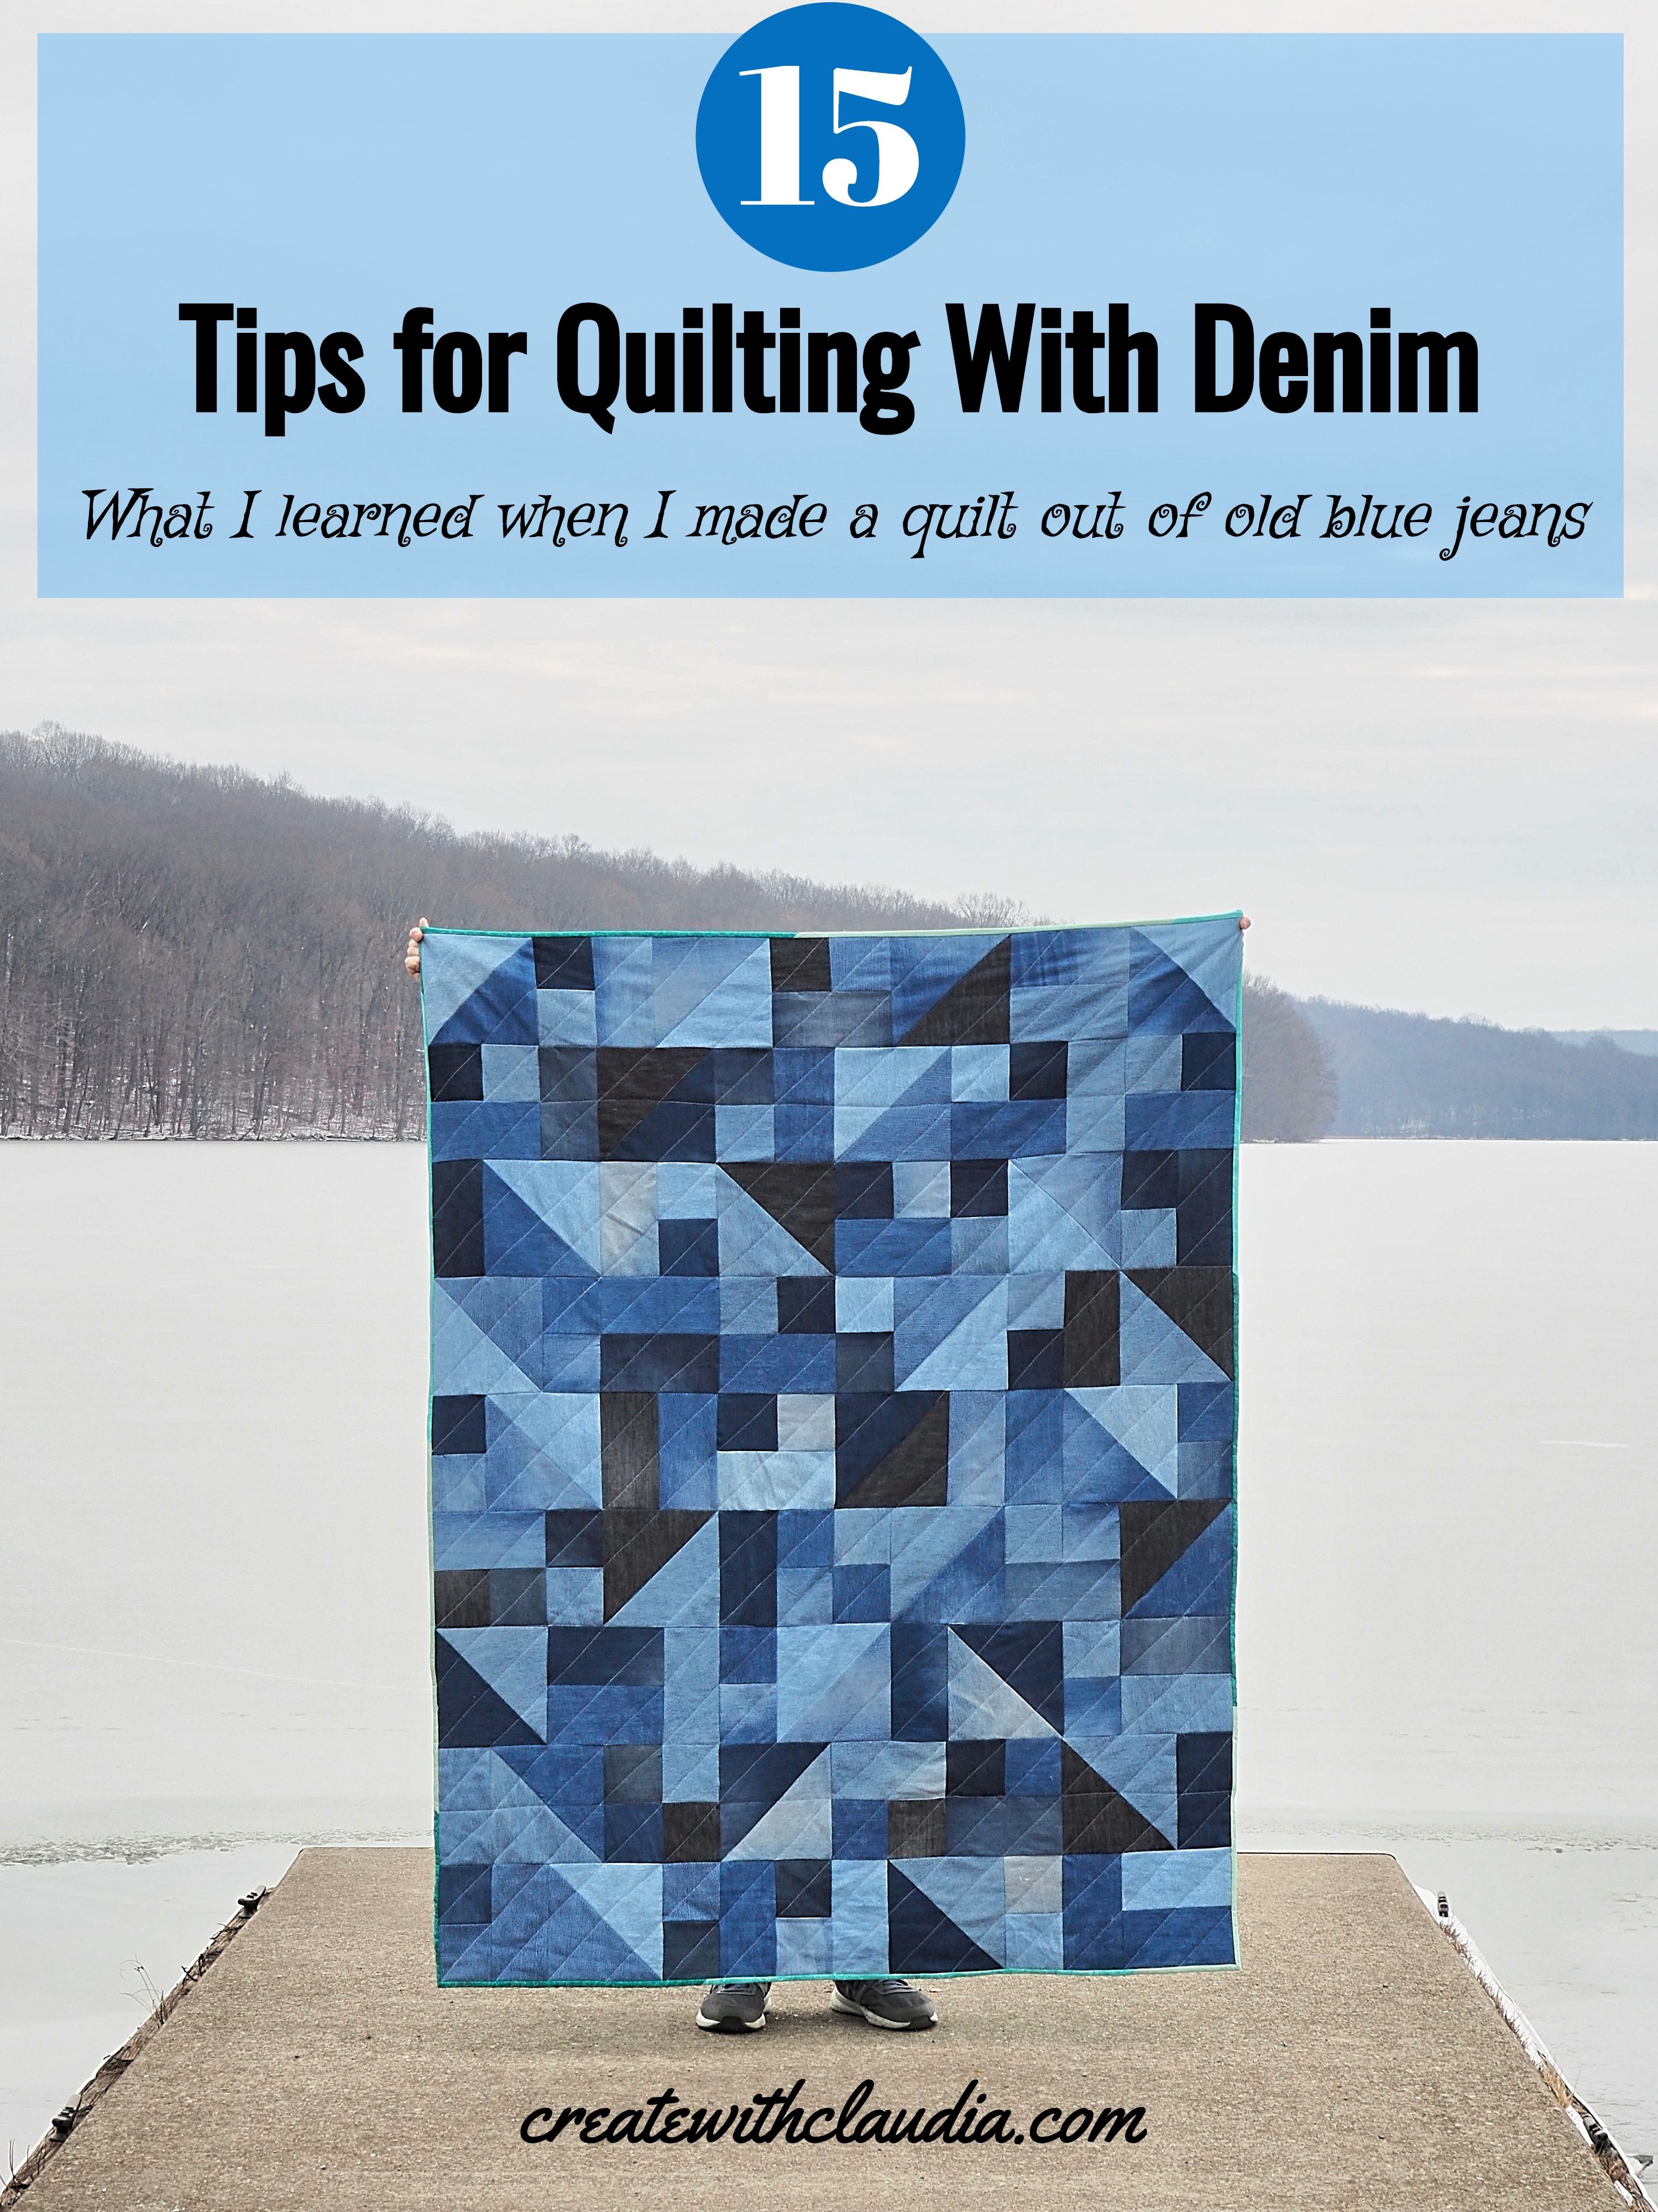 How To Make A Denim Quilt Using Old Jeans (An Ultra Simple Sewing Project!)